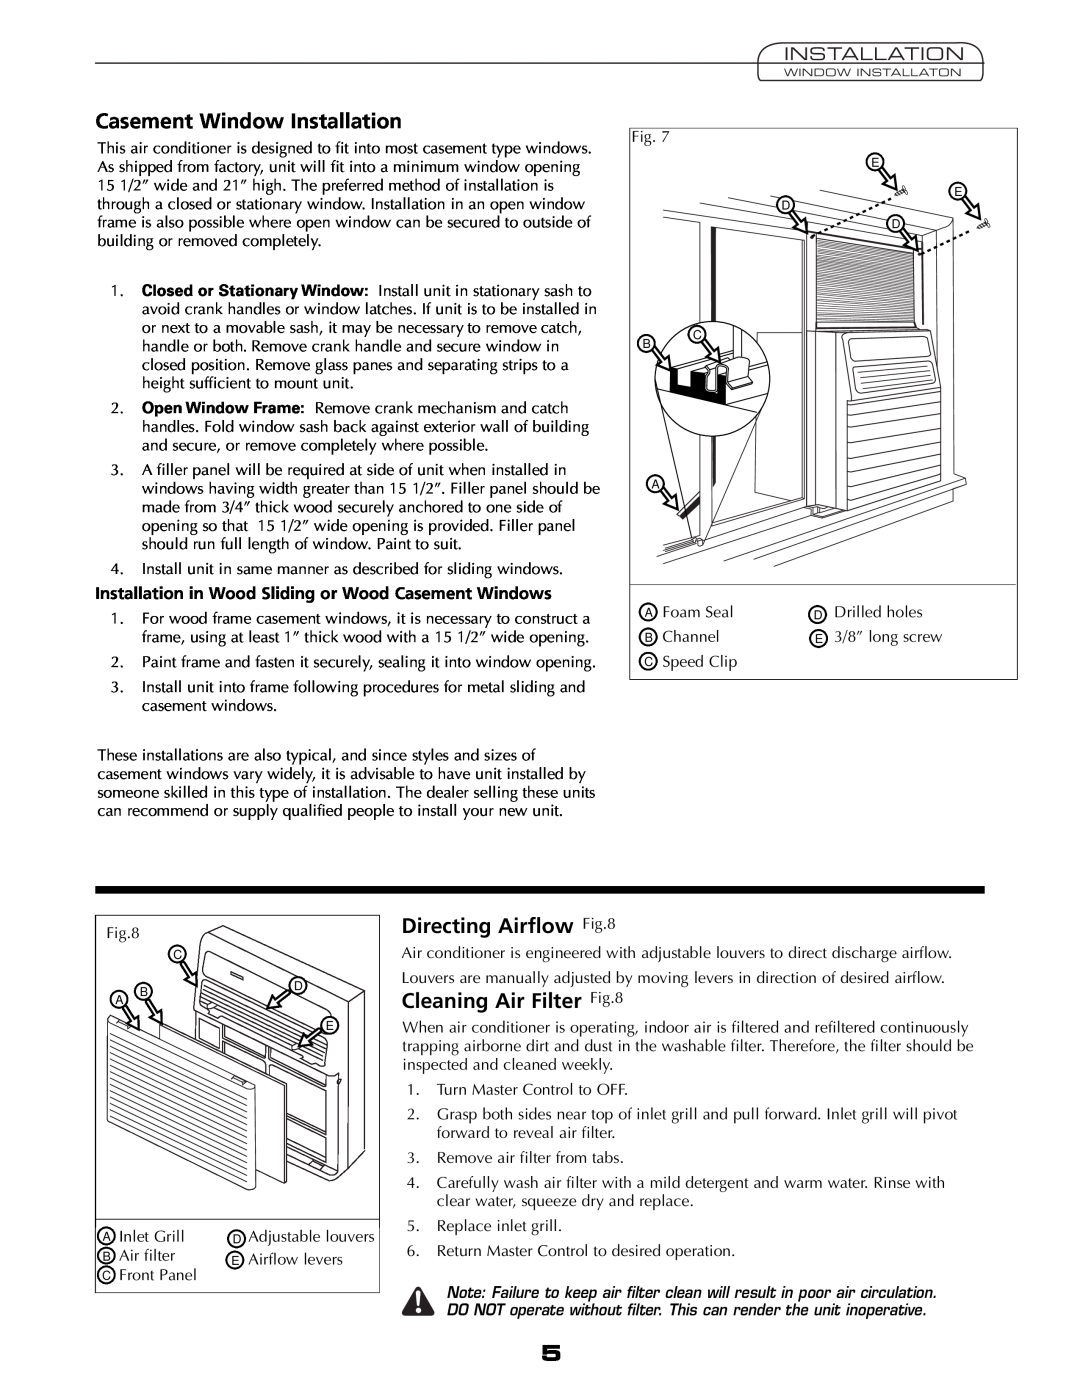 Fedders A6V05S2B important safety instructions Casement Window Installation, Directing Airflow, Cleaning Air Filter 